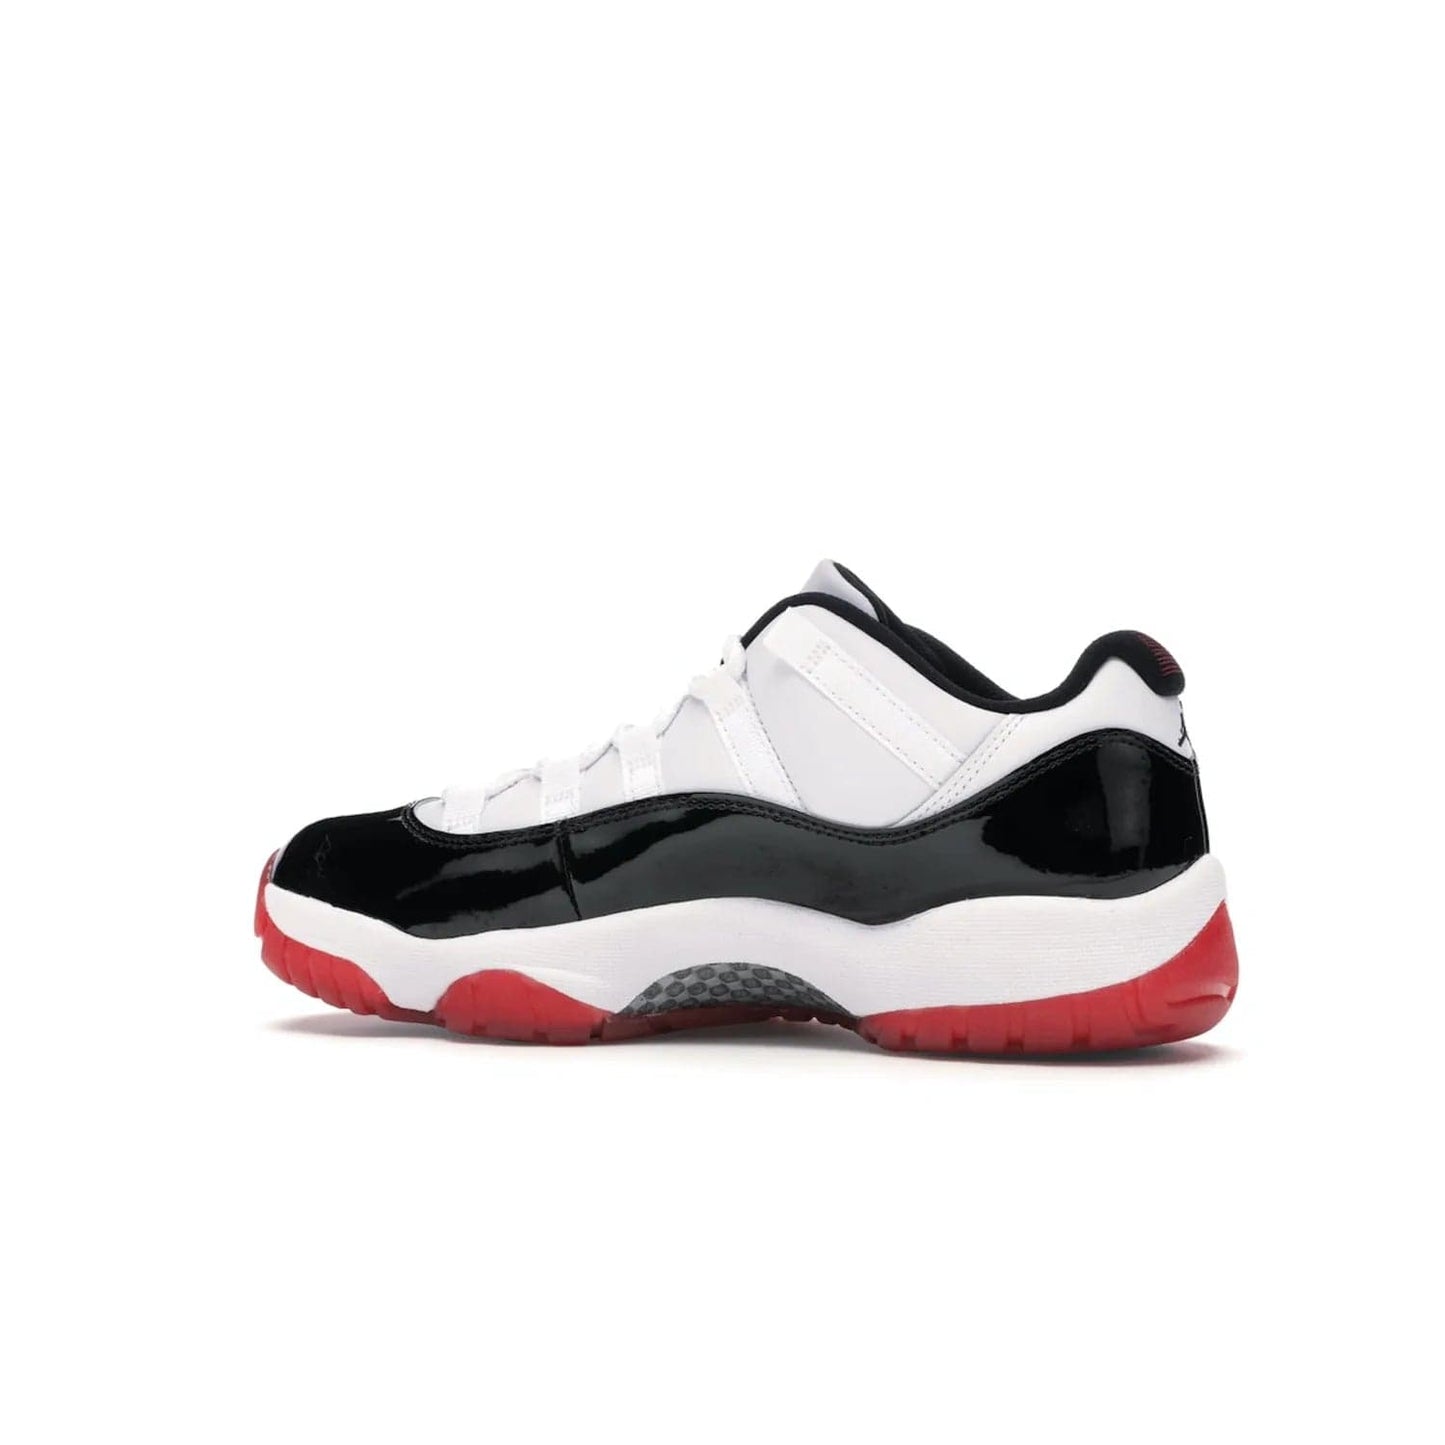 Jordan 11 Retro Low Concord Bred - Image 21 - Only at www.BallersClubKickz.com - Grab the classic Jordan 11 look with the Jordan 11 Retro Low Concord Bred. With white and black elements and the iconic red outsole of the Jordan 11 Bred, you won't miss a beat. Released in June 2020, the perfect complement to any outfit.